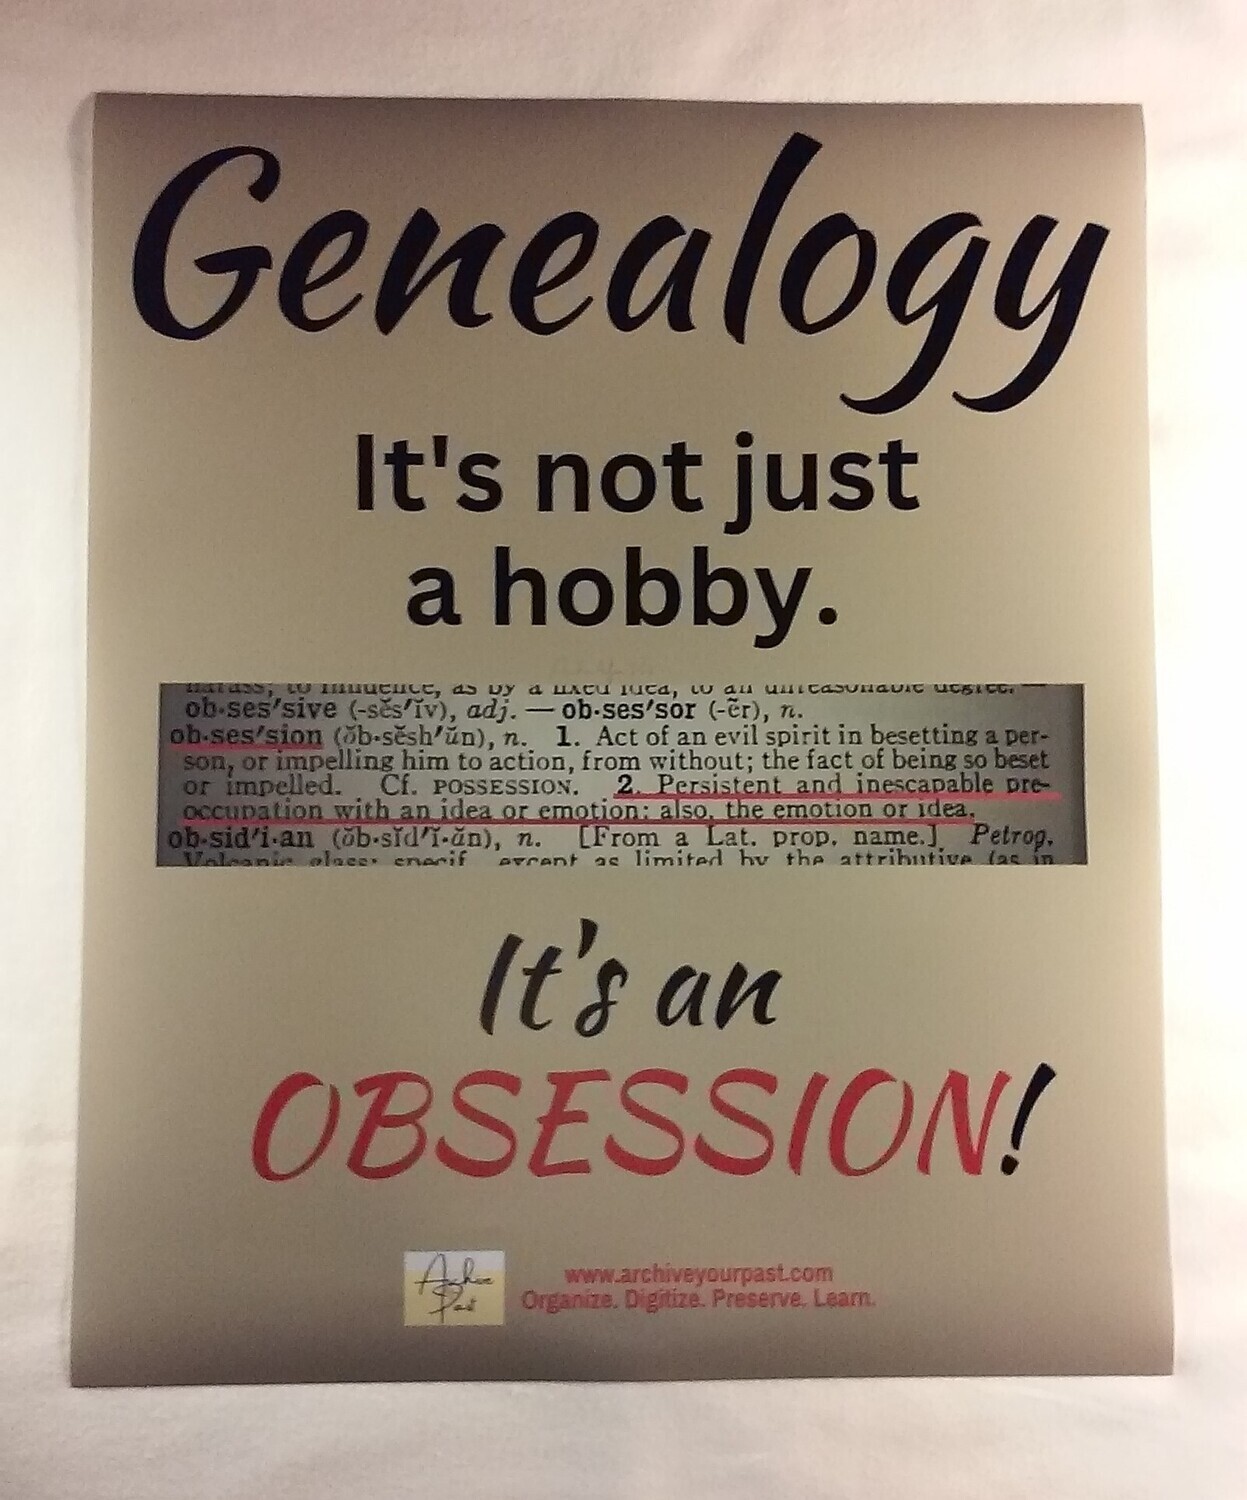 Genealogy Obsession Poster